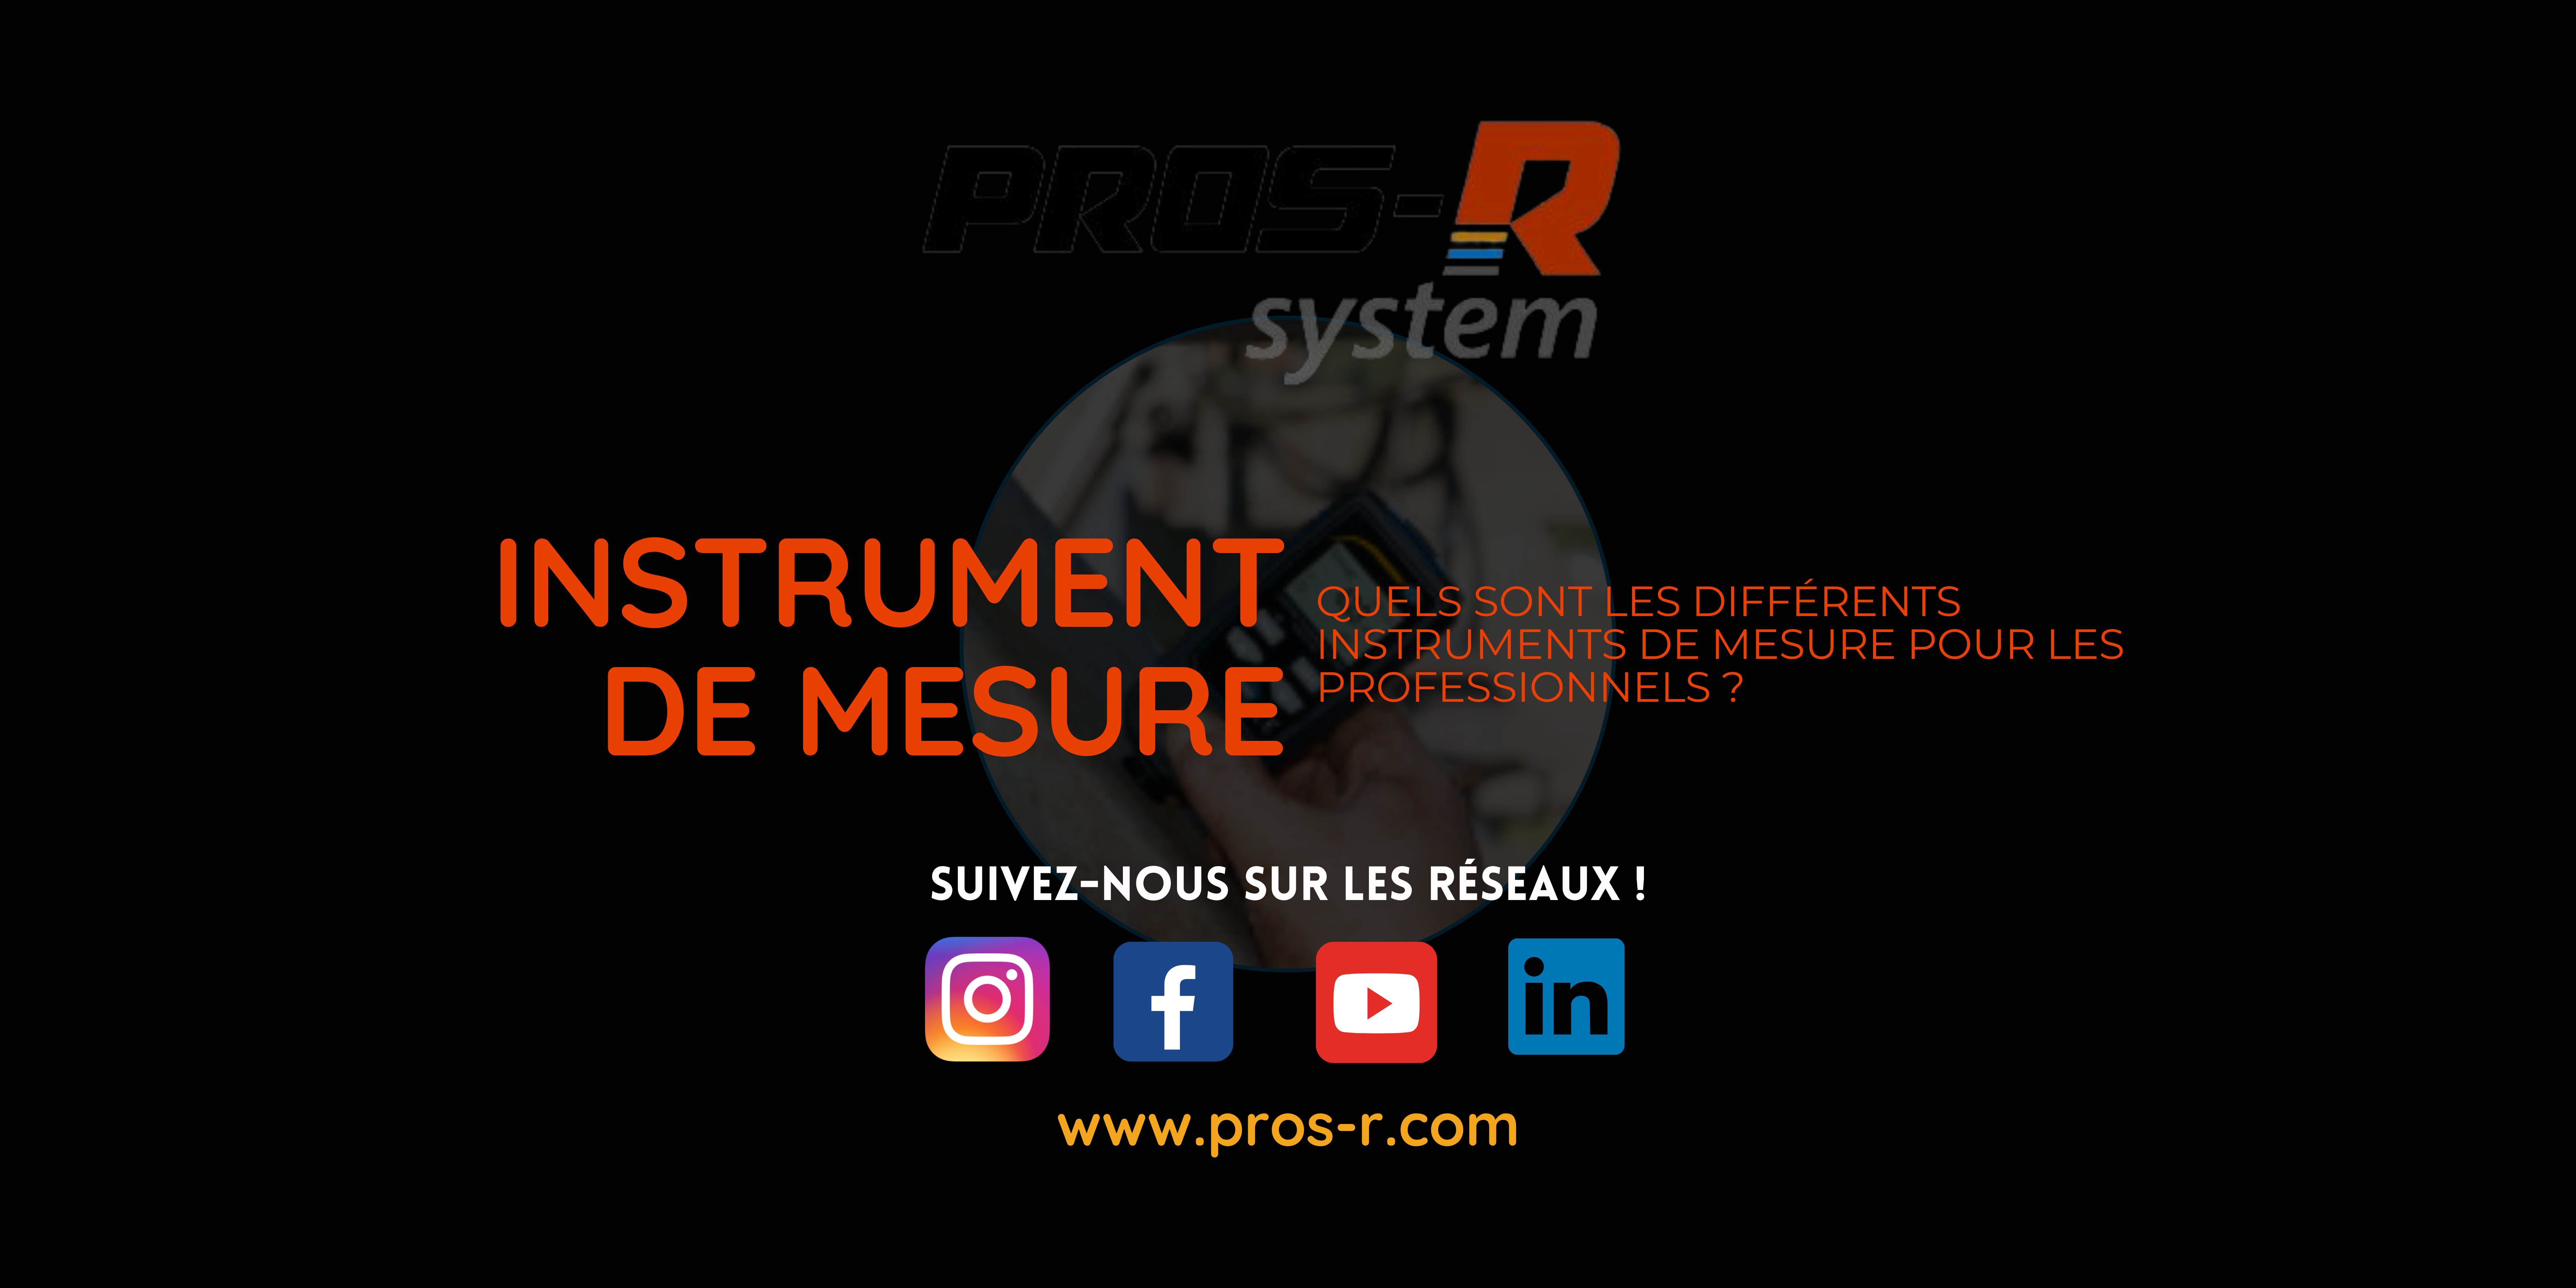 What are the different measuring instruments for professionals? PROS-R System